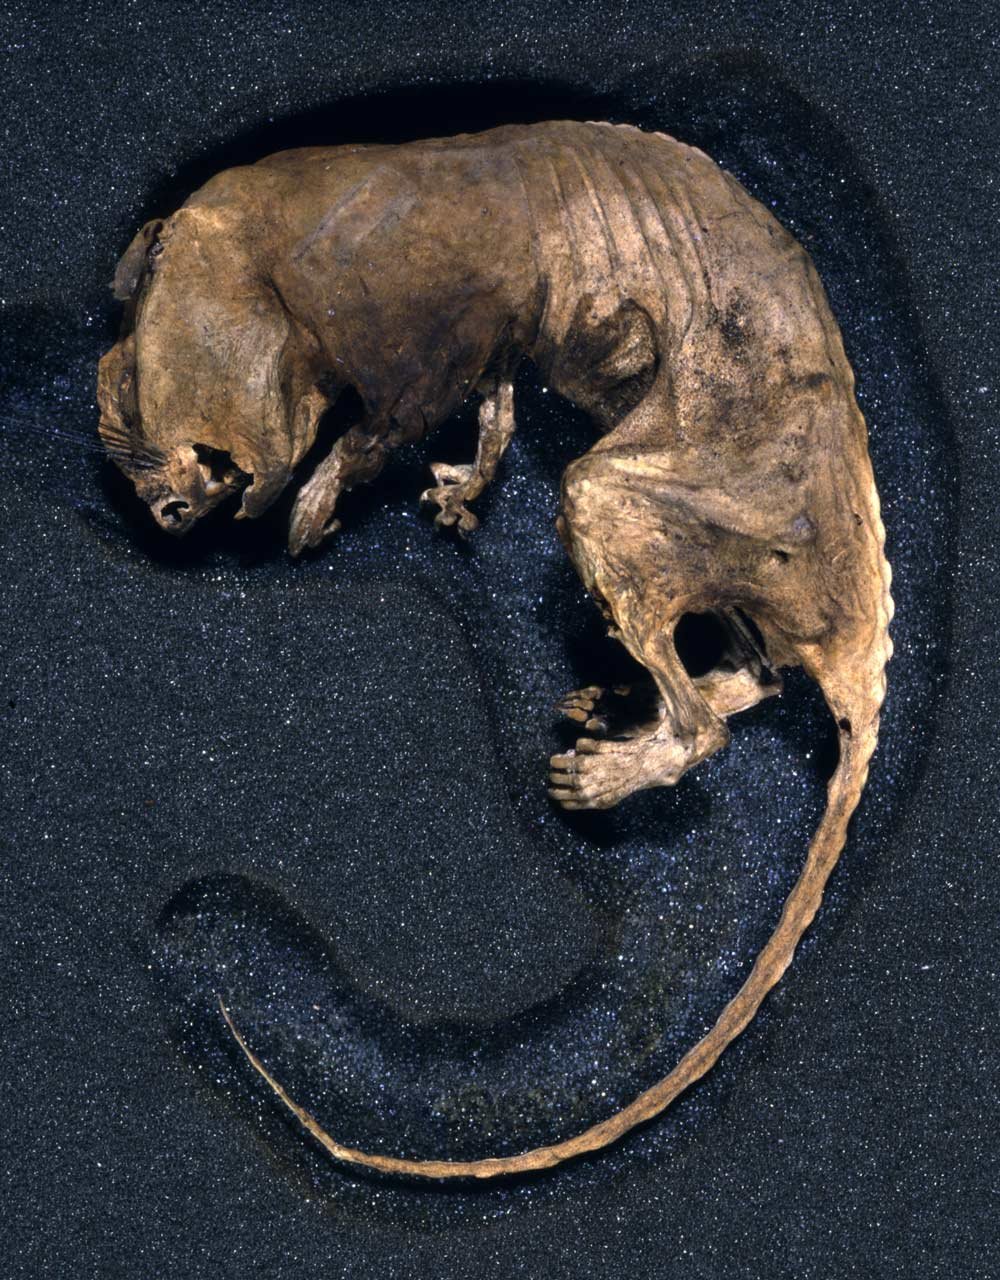 A photograph of a deceased rat. It is curled up against a blue background and looks mummified.